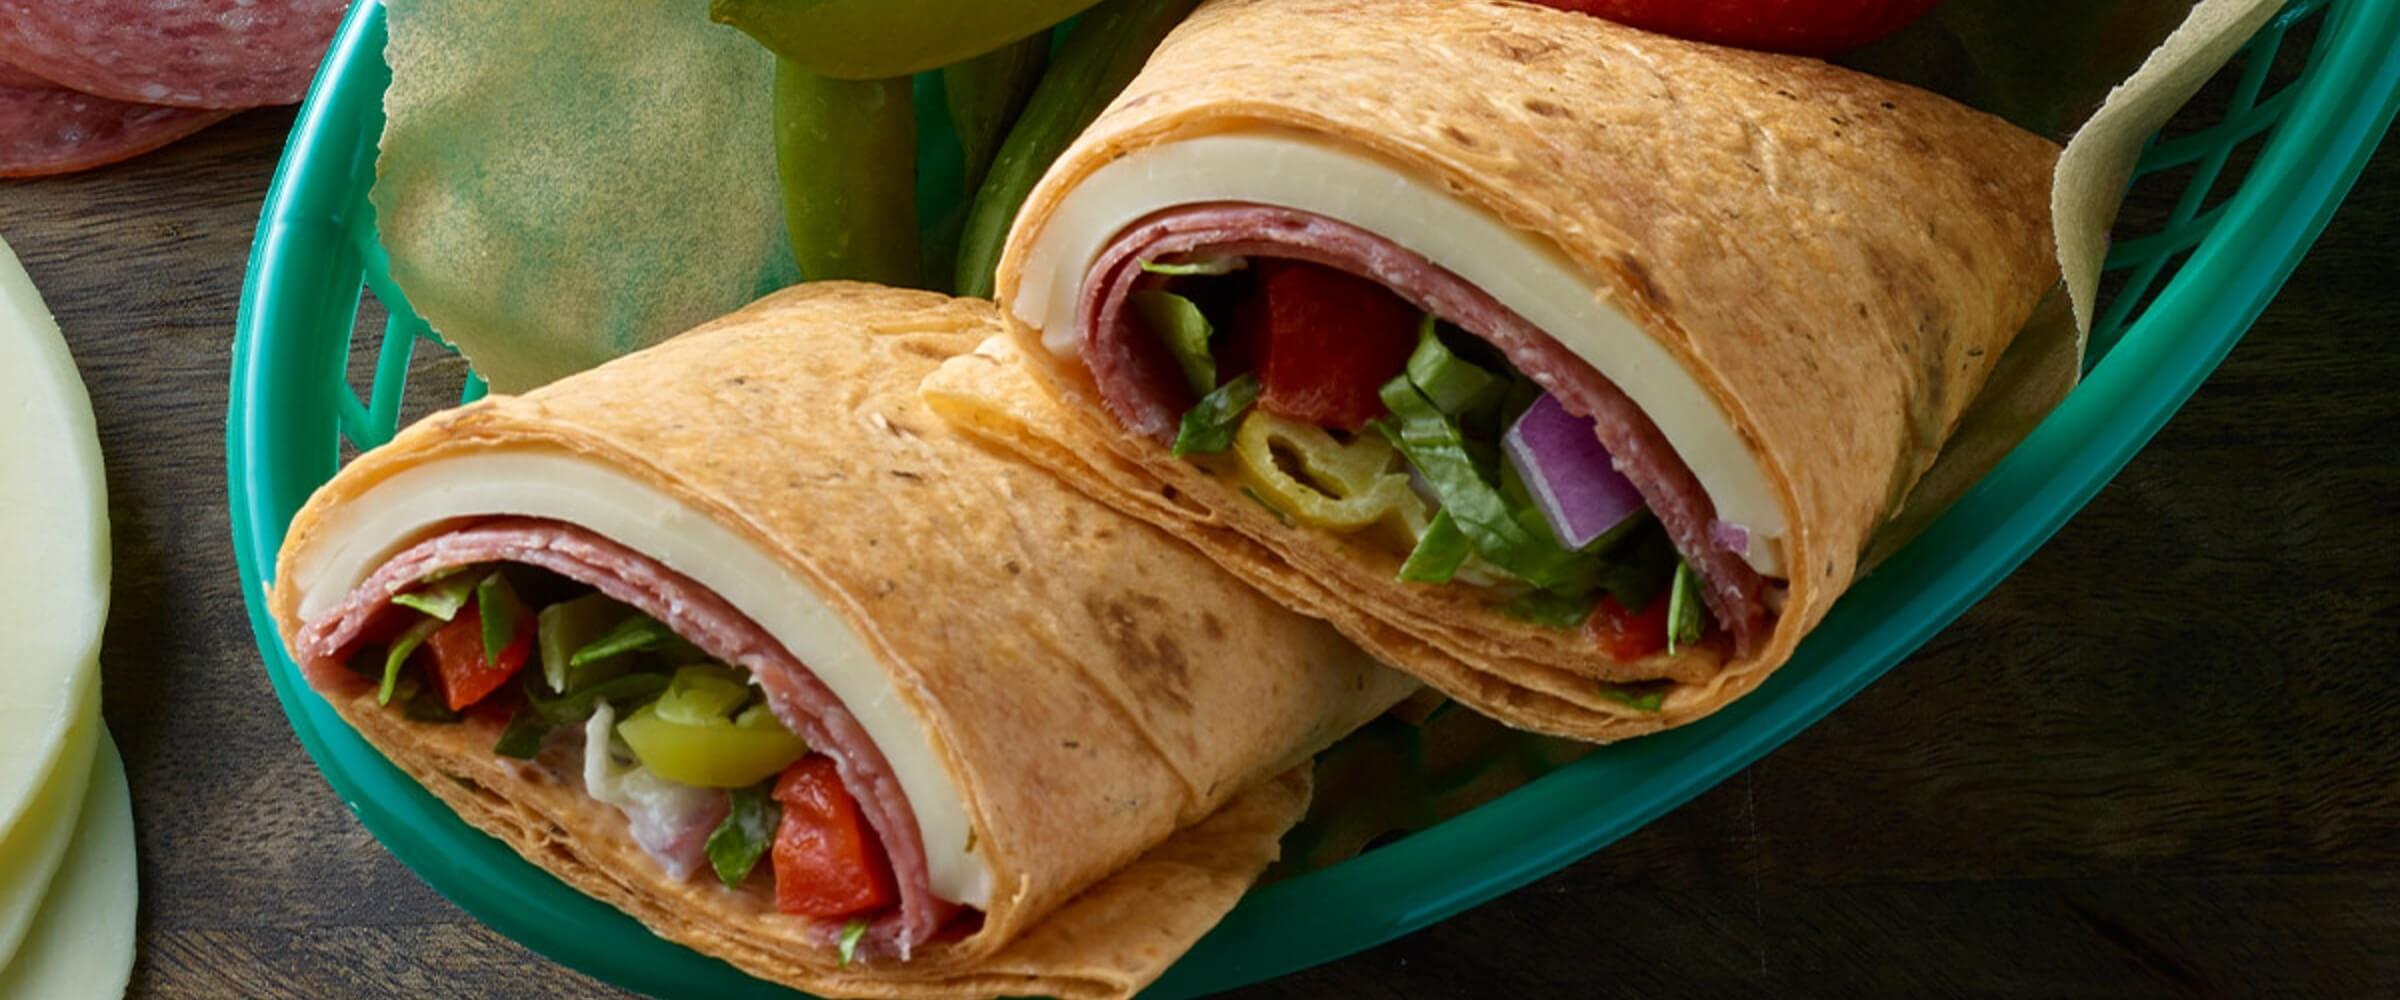 genoa wrap with cheese and vegetables in green basket